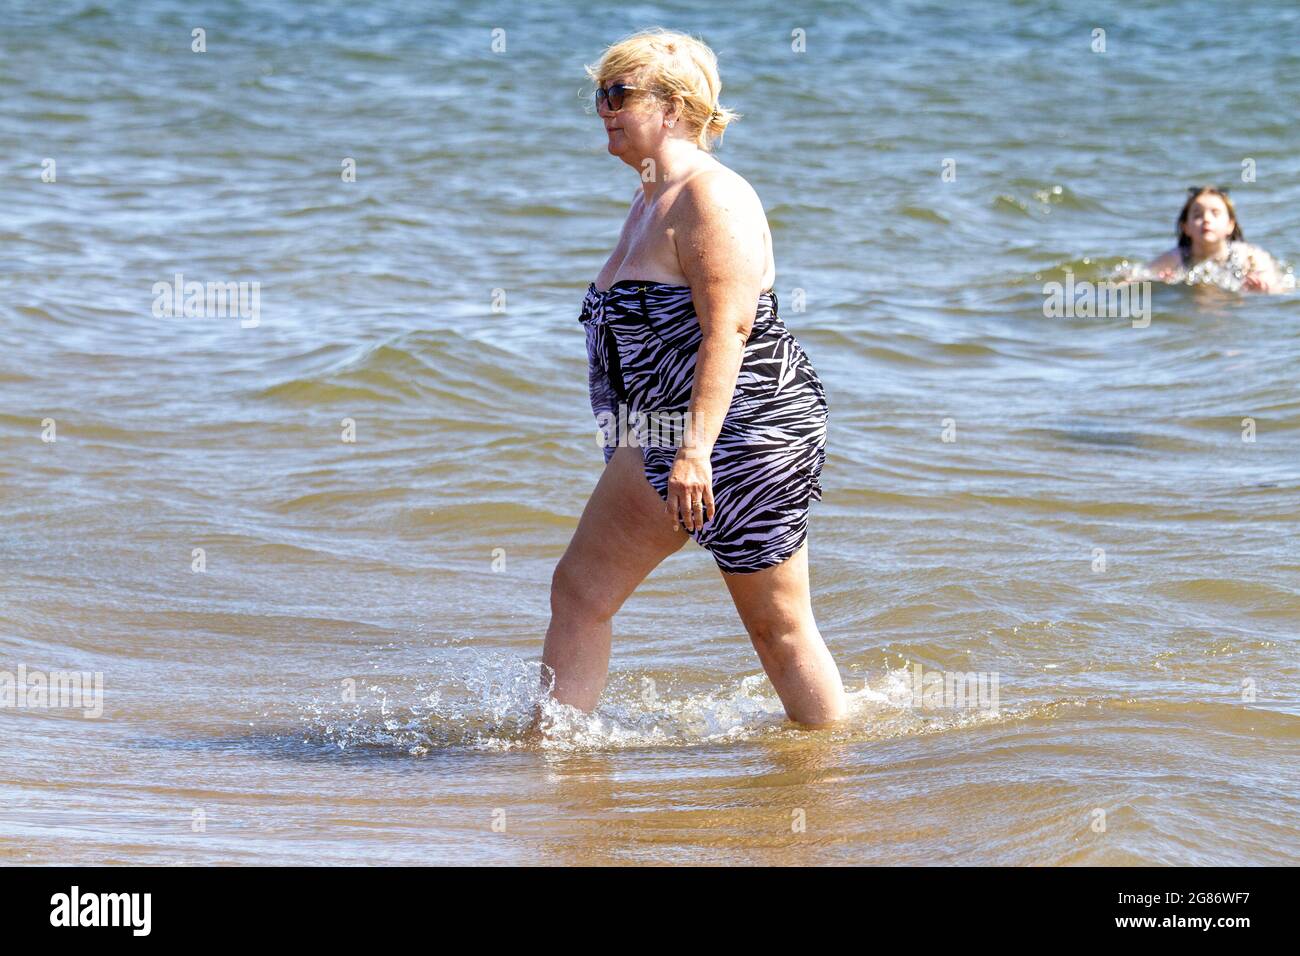 Dundee, Tayside, Scotland, UK. 17th July, 2021. UK Weather: July heatwave sweeping across North East Scotland with maximum temperature 27°C. Beach-goers day out at Broughty Ferry beach in Dundee. A local senior woman enjoying the warm summer sunshine cooling down in the river Tay. Credit: Dundee Photographics/Alamy Live News Stock Photo